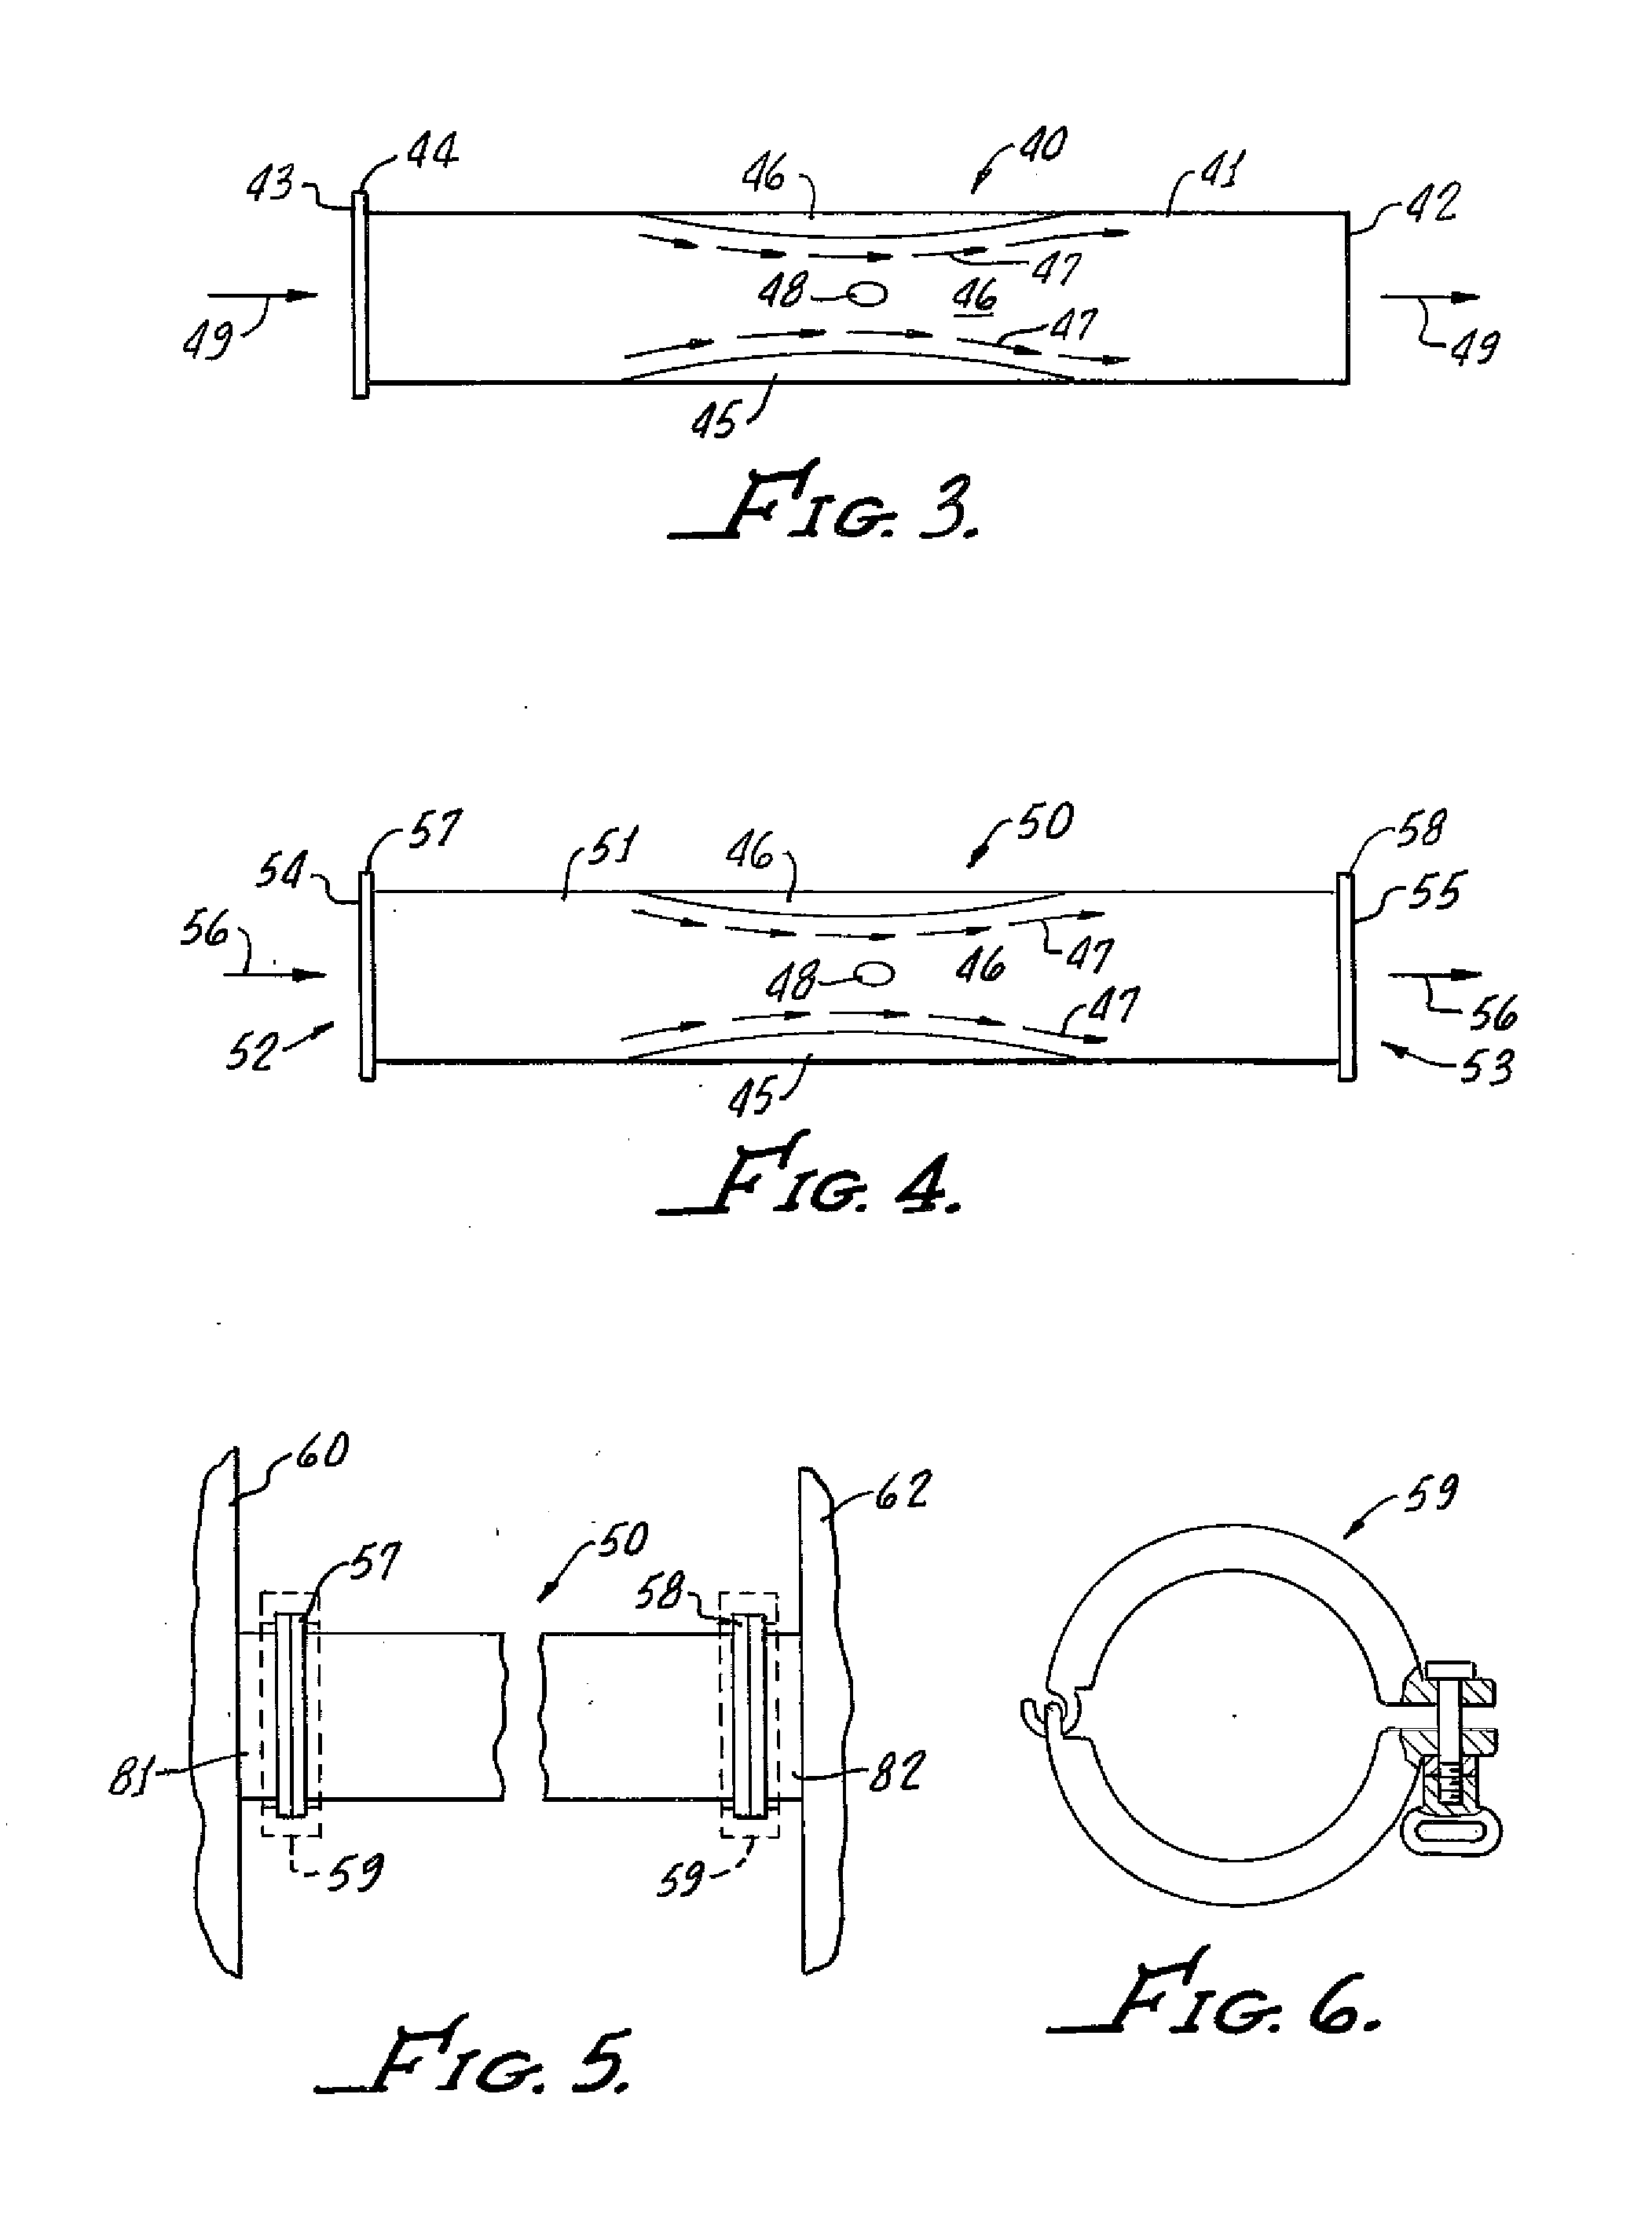 Device for reducing bitterness and astringency in beverages containing polyphenols and tannins